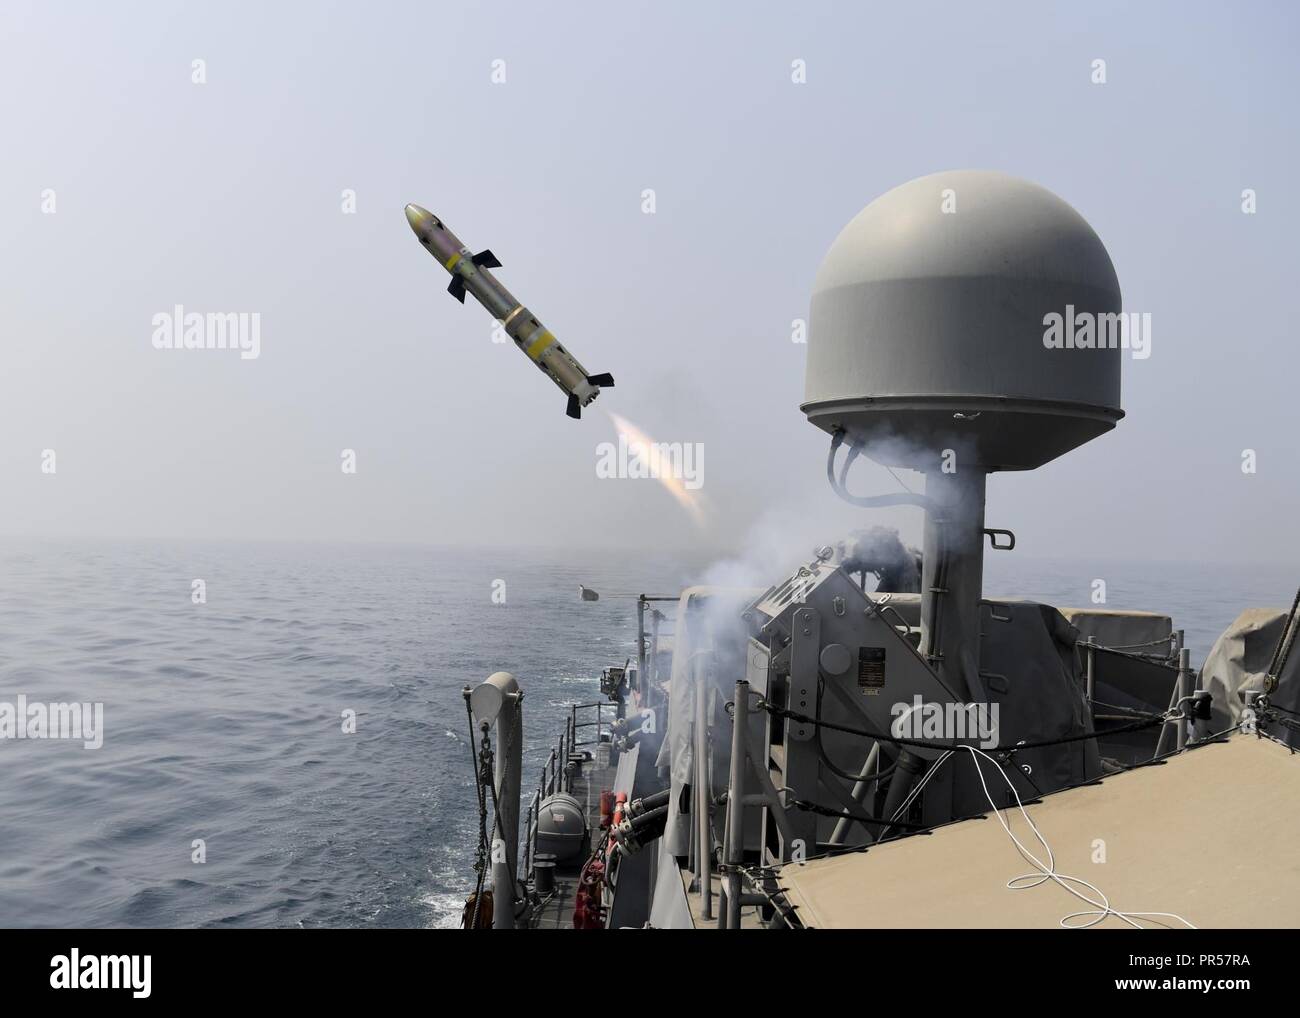 ARABIAN GULF (Sept. 16, 2018) A Griffin missile is launched from coastal patrol ship USS Thunderbolt (PC 12) during a MK-60 Griffin guided missile system shoot. Ships attached to U.S. 5th Fleet's Task Force 55 are conducting Griffin surface-to-surface missile and naval gun exercises against high speed maneuvering targets to advance their ability to defend minesweepers and other coastal patrol ships. U.S. 5th Fleet and coalition assets are participating in numerous exercises as part of the greater Theater Counter Mine and Maritime Security Exercise to ensure maritime stability and security in t Stock Photo